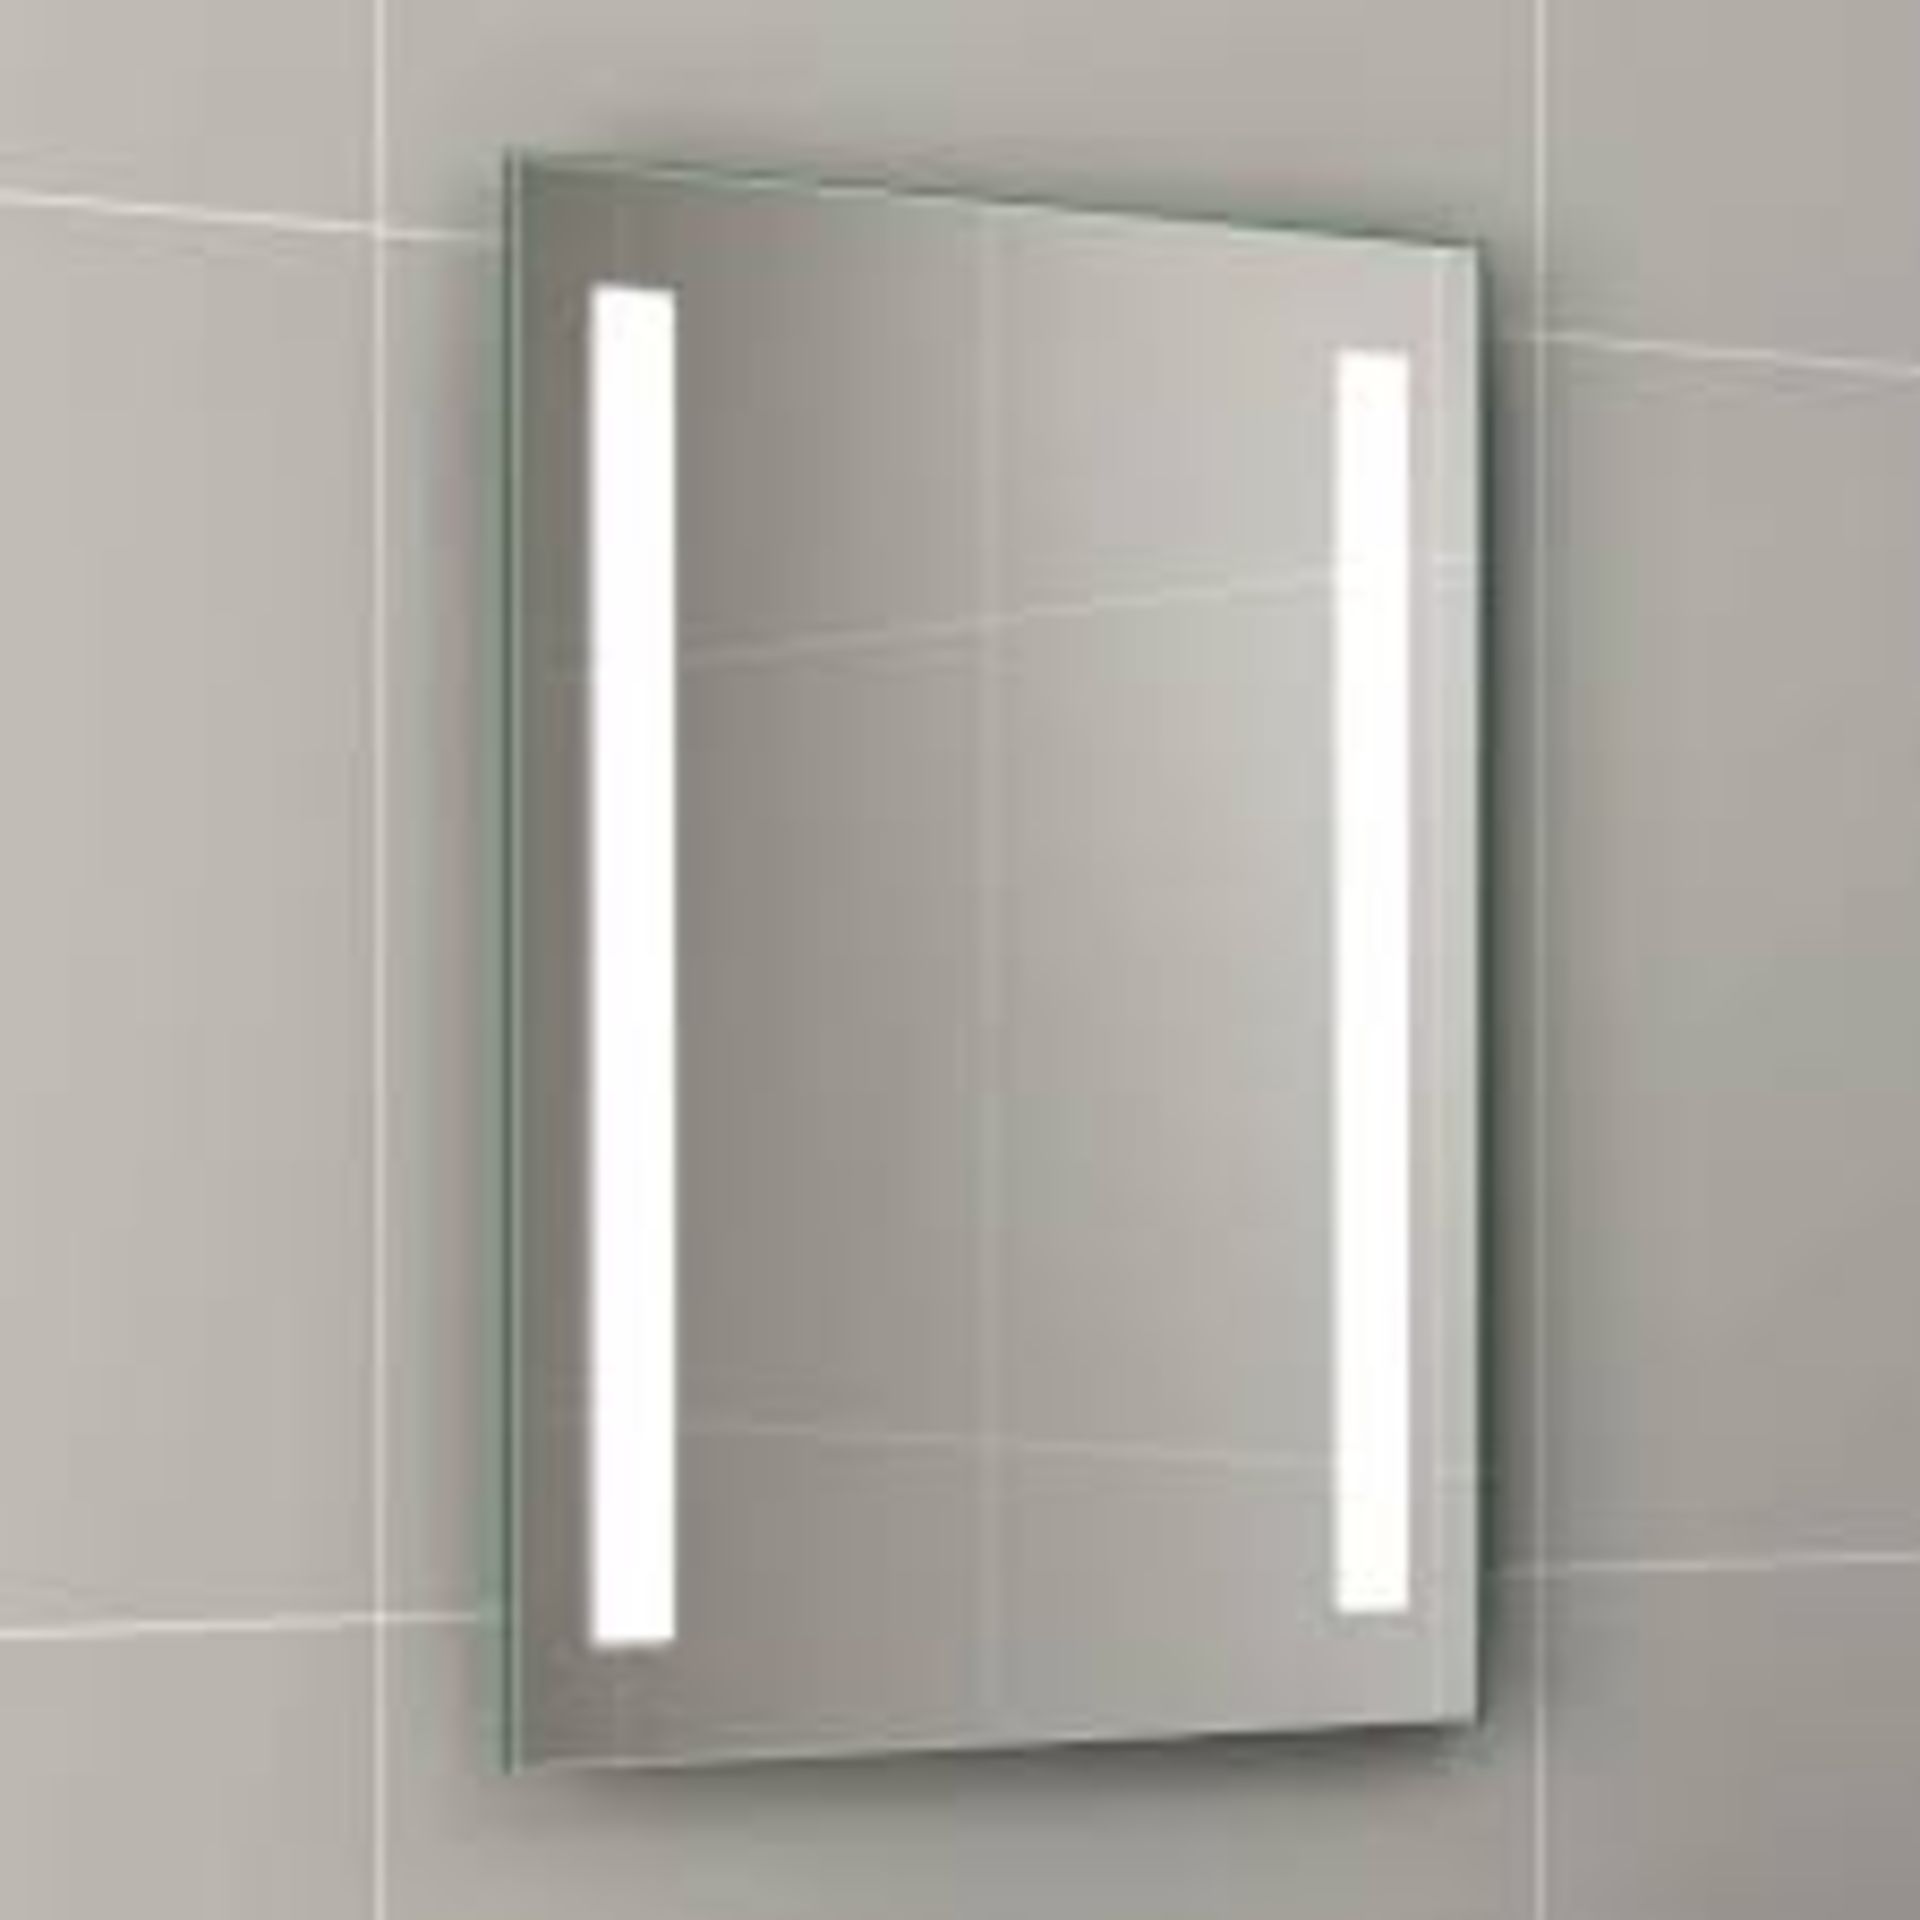 (J120) 500x700mm Omega LED Mirror - Battery Operated. RRP £299.99. Energy saving controlled On / Off - Bild 2 aus 4